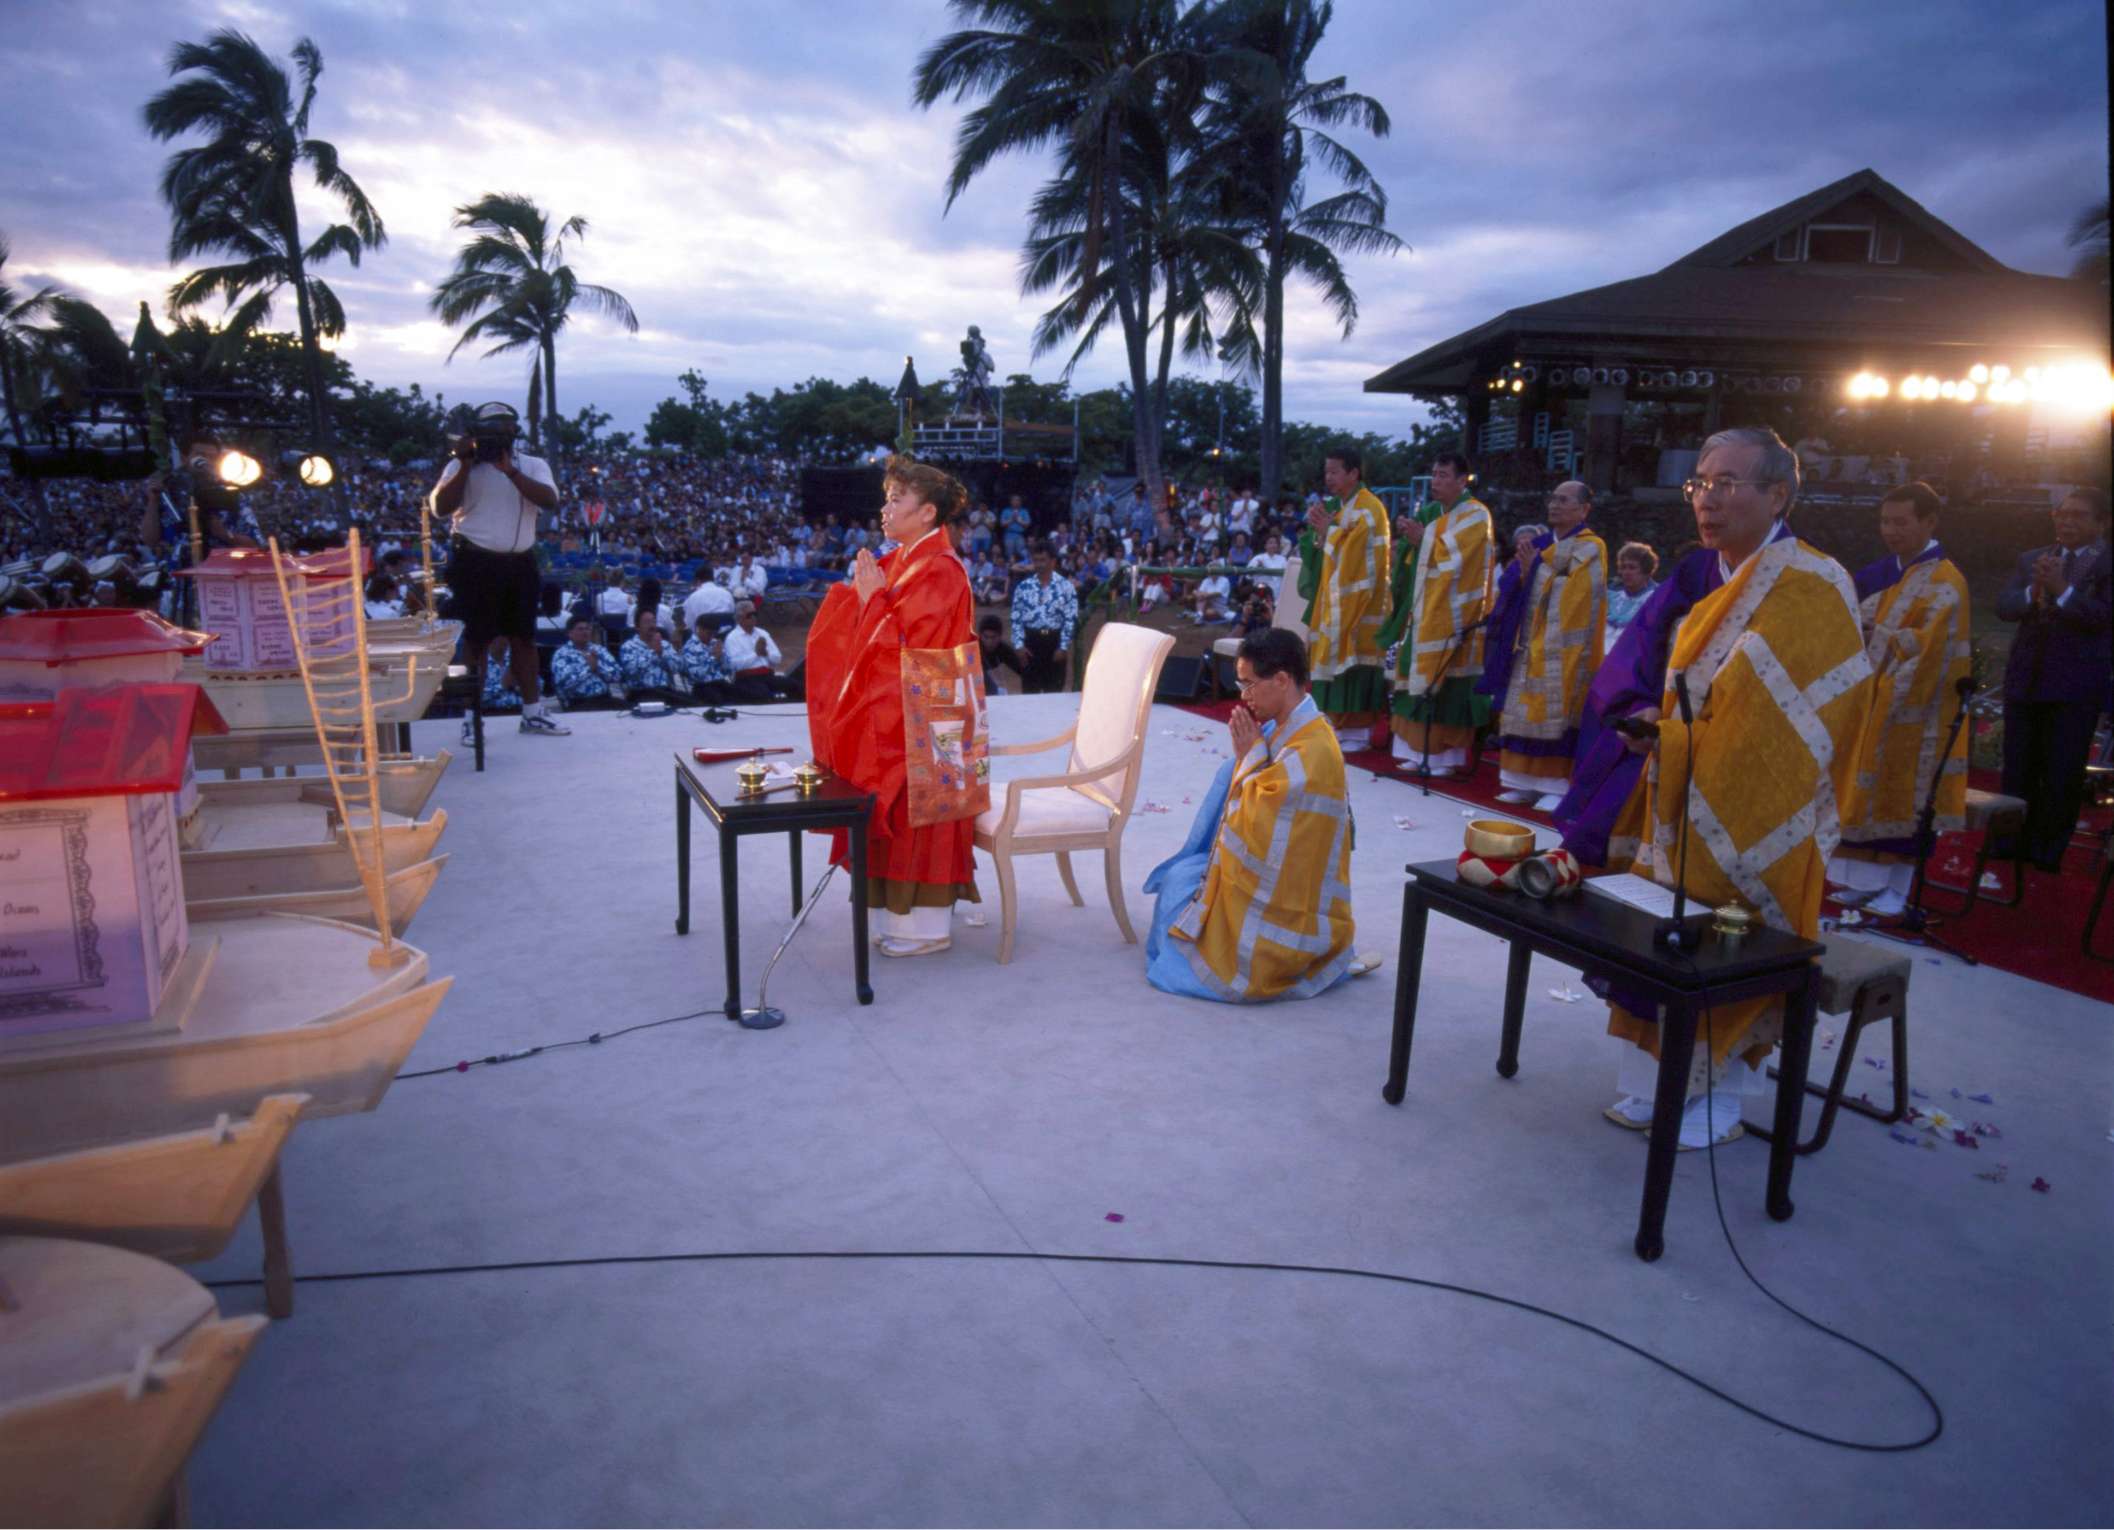 Her Holiness stands in bright orange robes, hands in prayer, on an open-air stage near large boat-like lanterns, with yellow-robed priests behind, and a large audience beneath palm trees looking on.